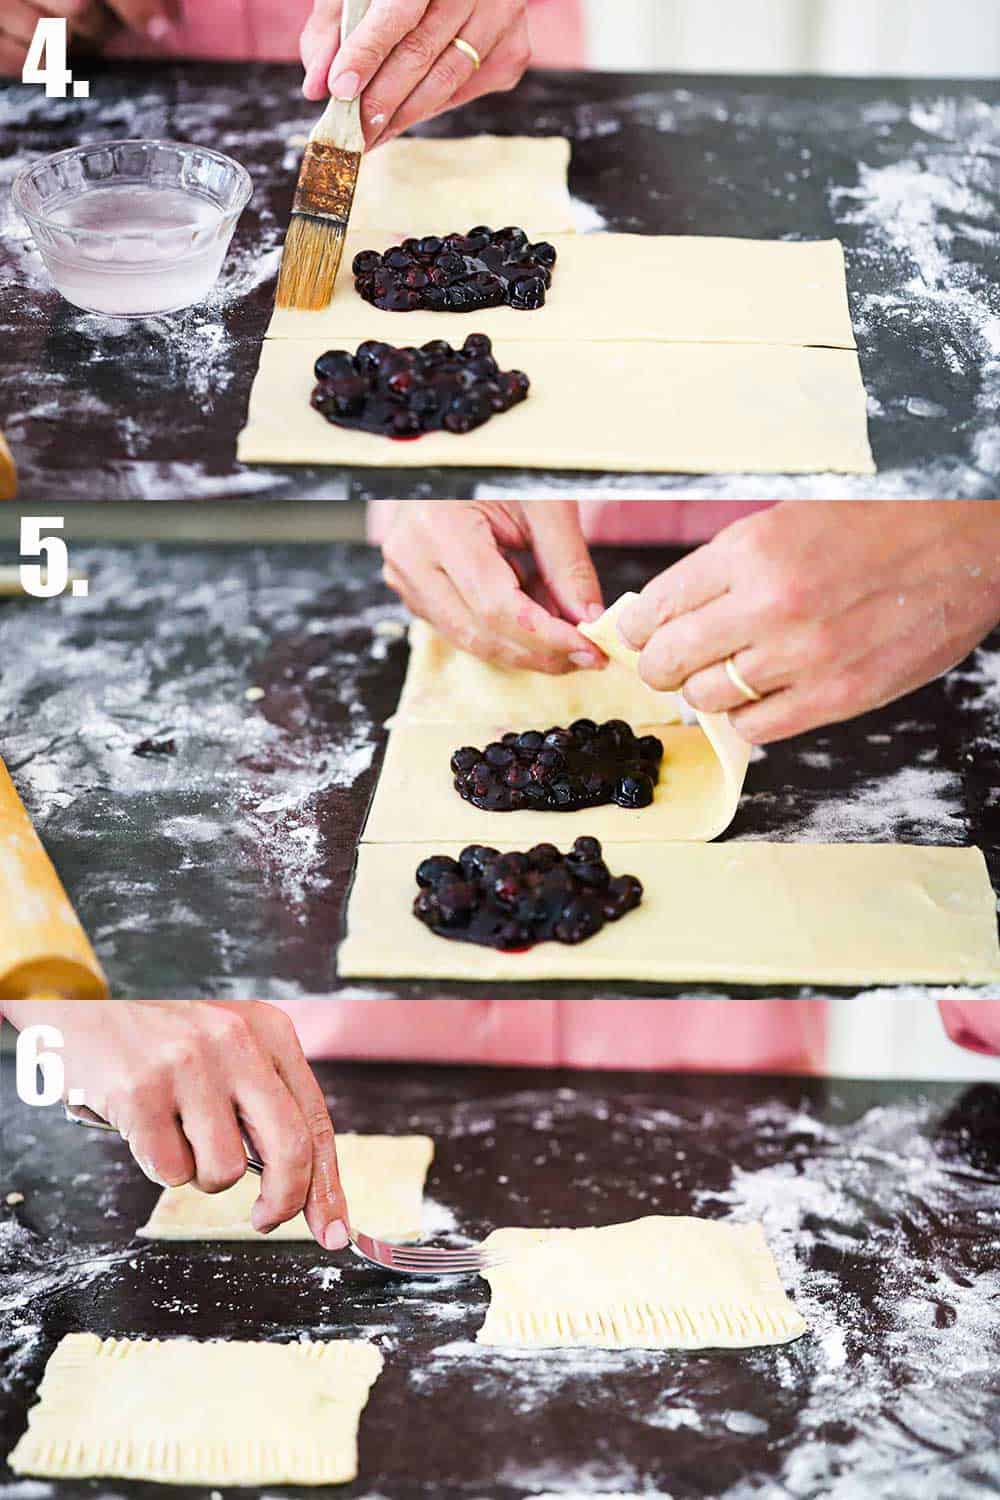 3 stacked images with the top being a hand brushing water on the edges of dough with blueberries on it, the middle are two hands folding the dough over the blueberries, and the bottom a hand using a fork to crimp the edges of the pop tart.